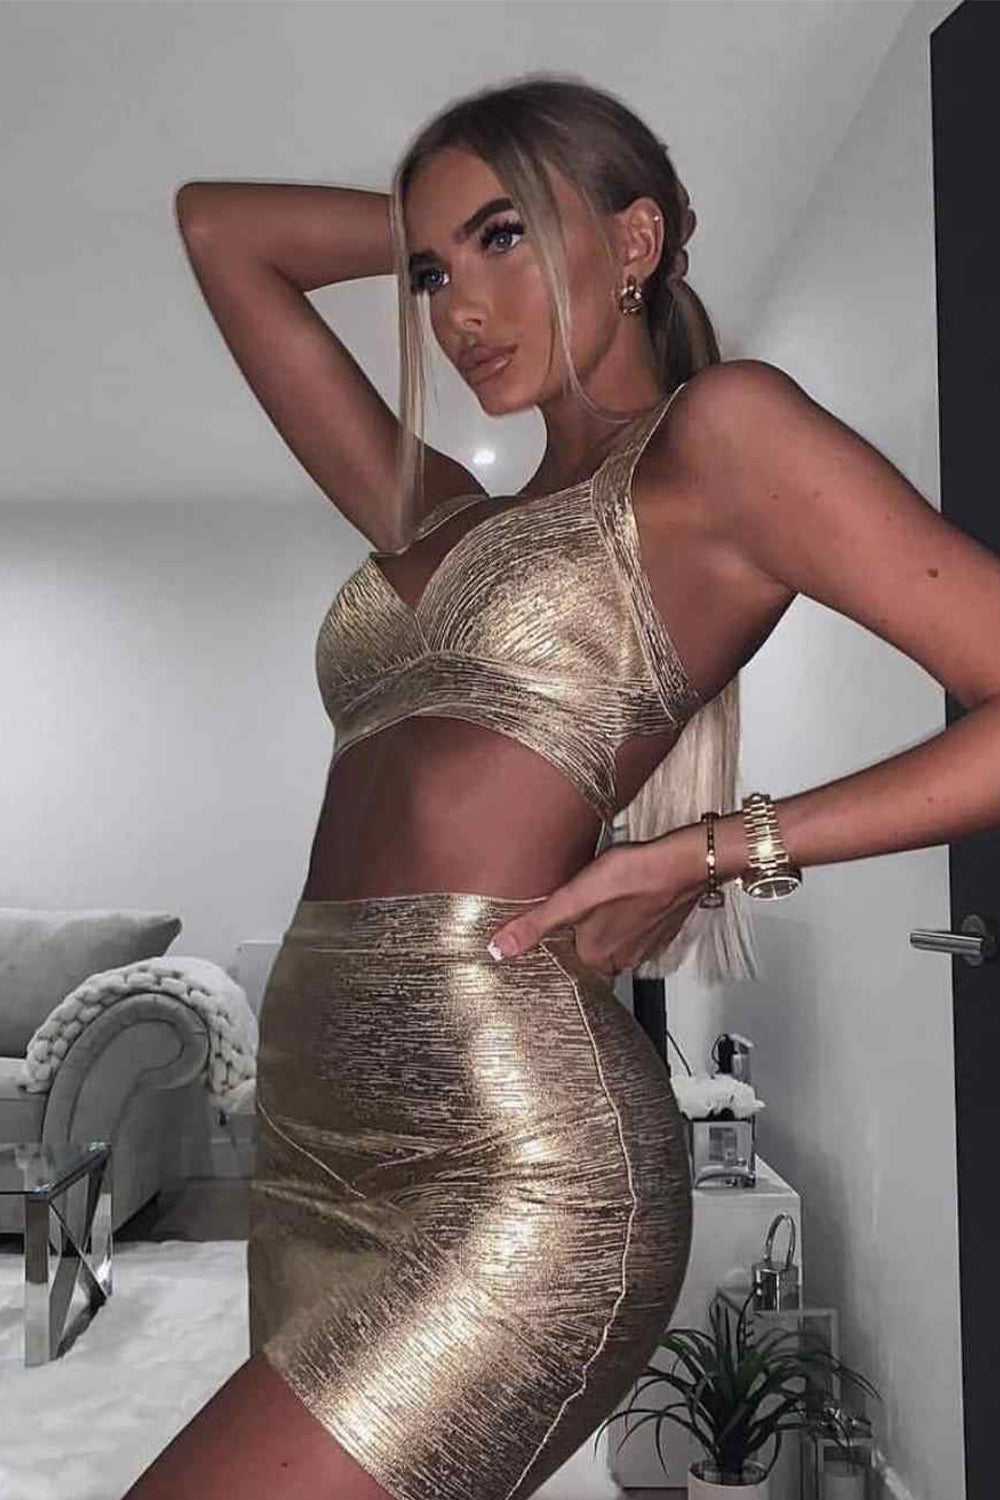 gold top, gold bandage top, gold crop top, metallic bandage top, gold metallic top, bandage top for women, top, bandage top, tank top, crop top, mini bandage top, sexy bandage top, skirt, bandage skirt, gold bandage skirt, high waist bandage skirt, mini bandage skirt, asymmetric bandage skirt, metallic bandage skirt, top skirt two pieces set, women’s set, outfit set